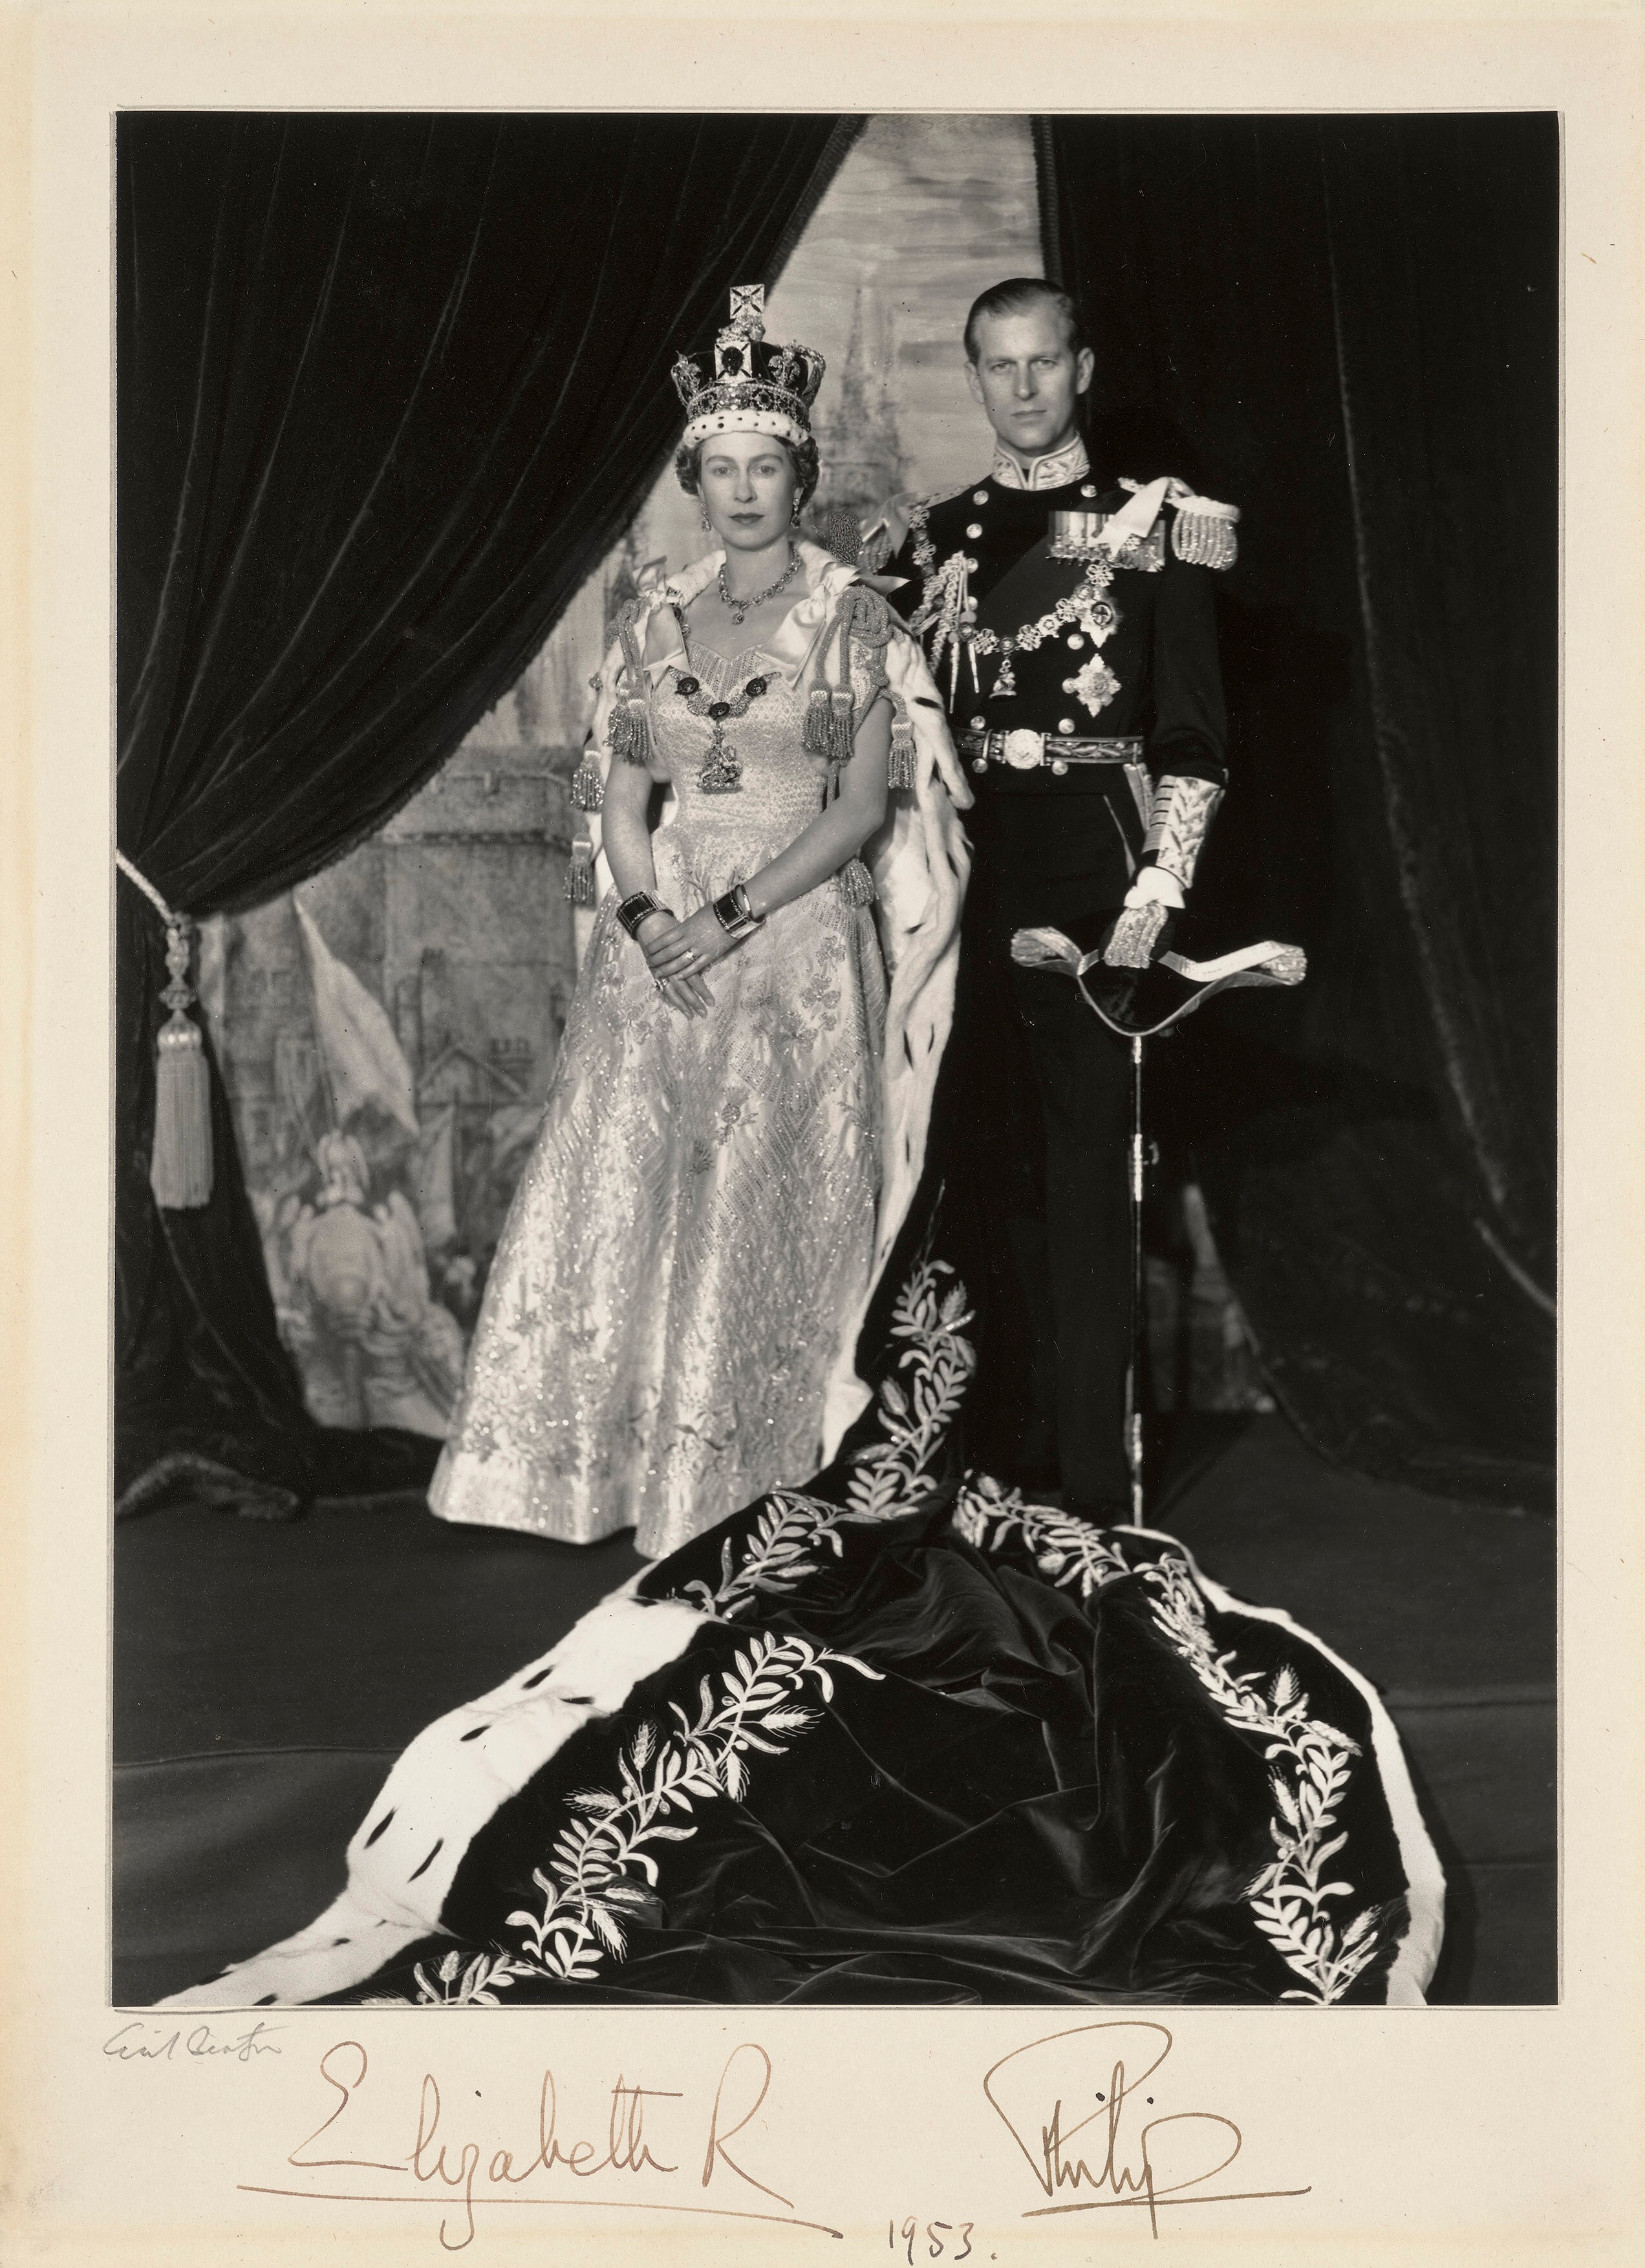 The Queen Mother's copy of Queen Elizabeth and Prince Philip's coronation photo from 1953